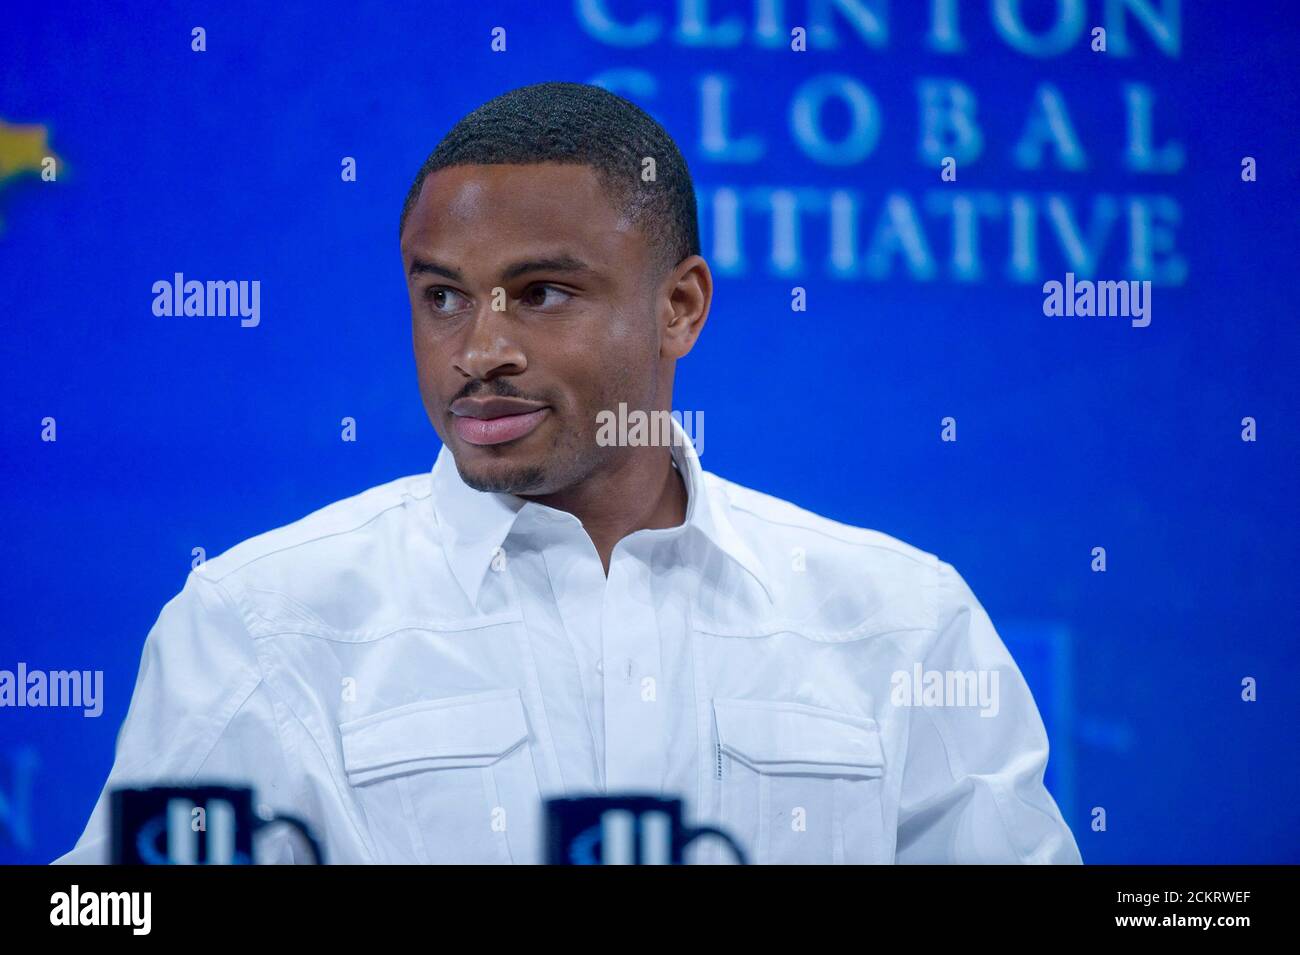 Austin, TX February 14, 2009: Oakland Raiders cornerback Nnamdi Asomugha listens on a panel at the second-annual Clinton Global Initiative University, a conference bringing together students to take action on global challenges such as poverty, hunger, energy, climate change and global health. The program is patterned after Clinton Global Initiative Foundation formed by President Bill Clinton. ©Bob Daemmrich Stock Photo